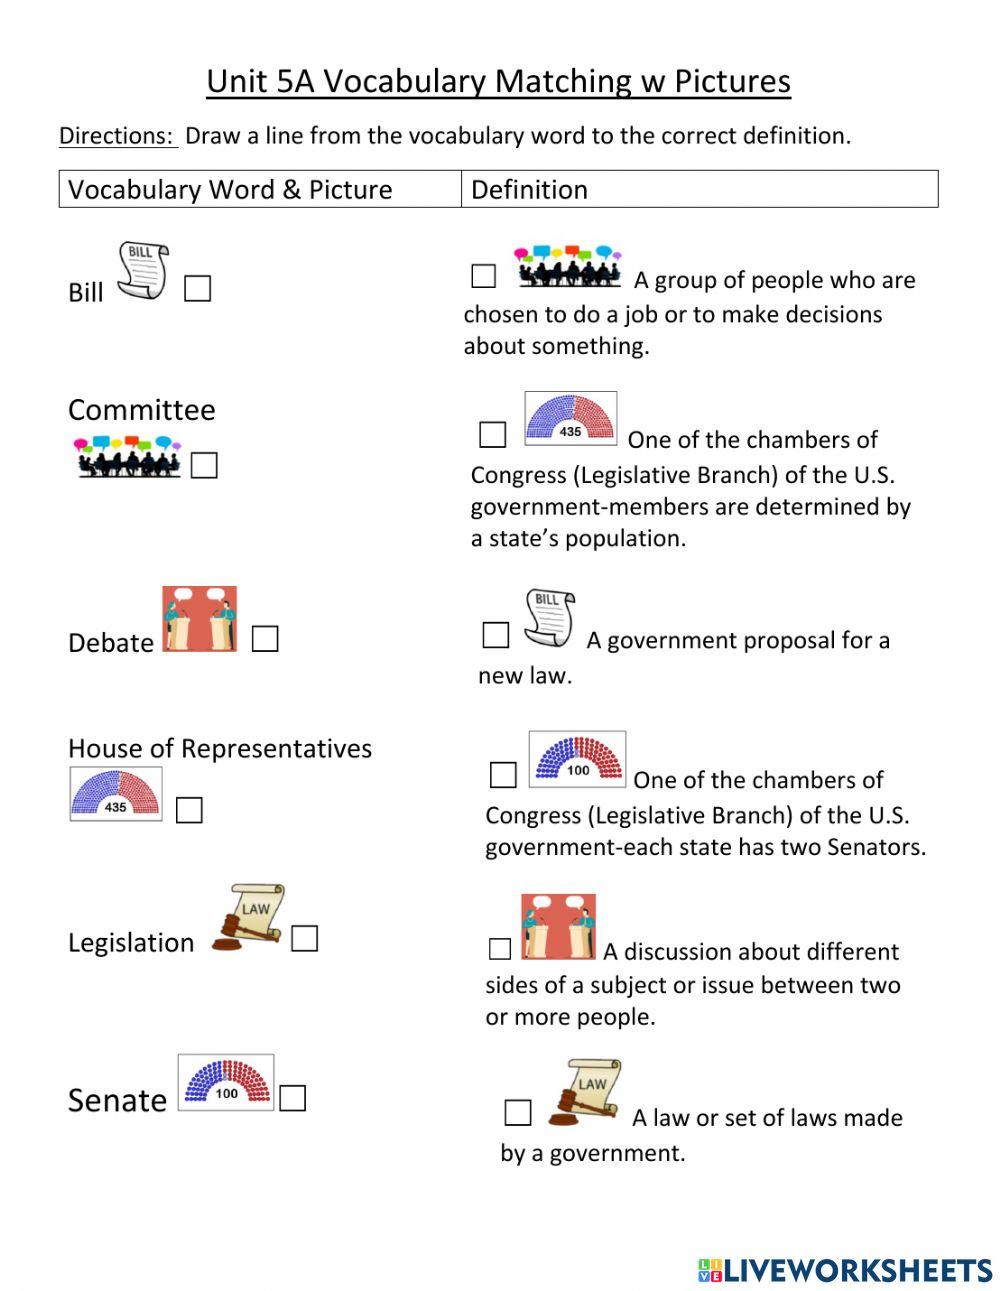 Unit 5A How a Bill Becomes a Law Vocabulary Matching with Pictures